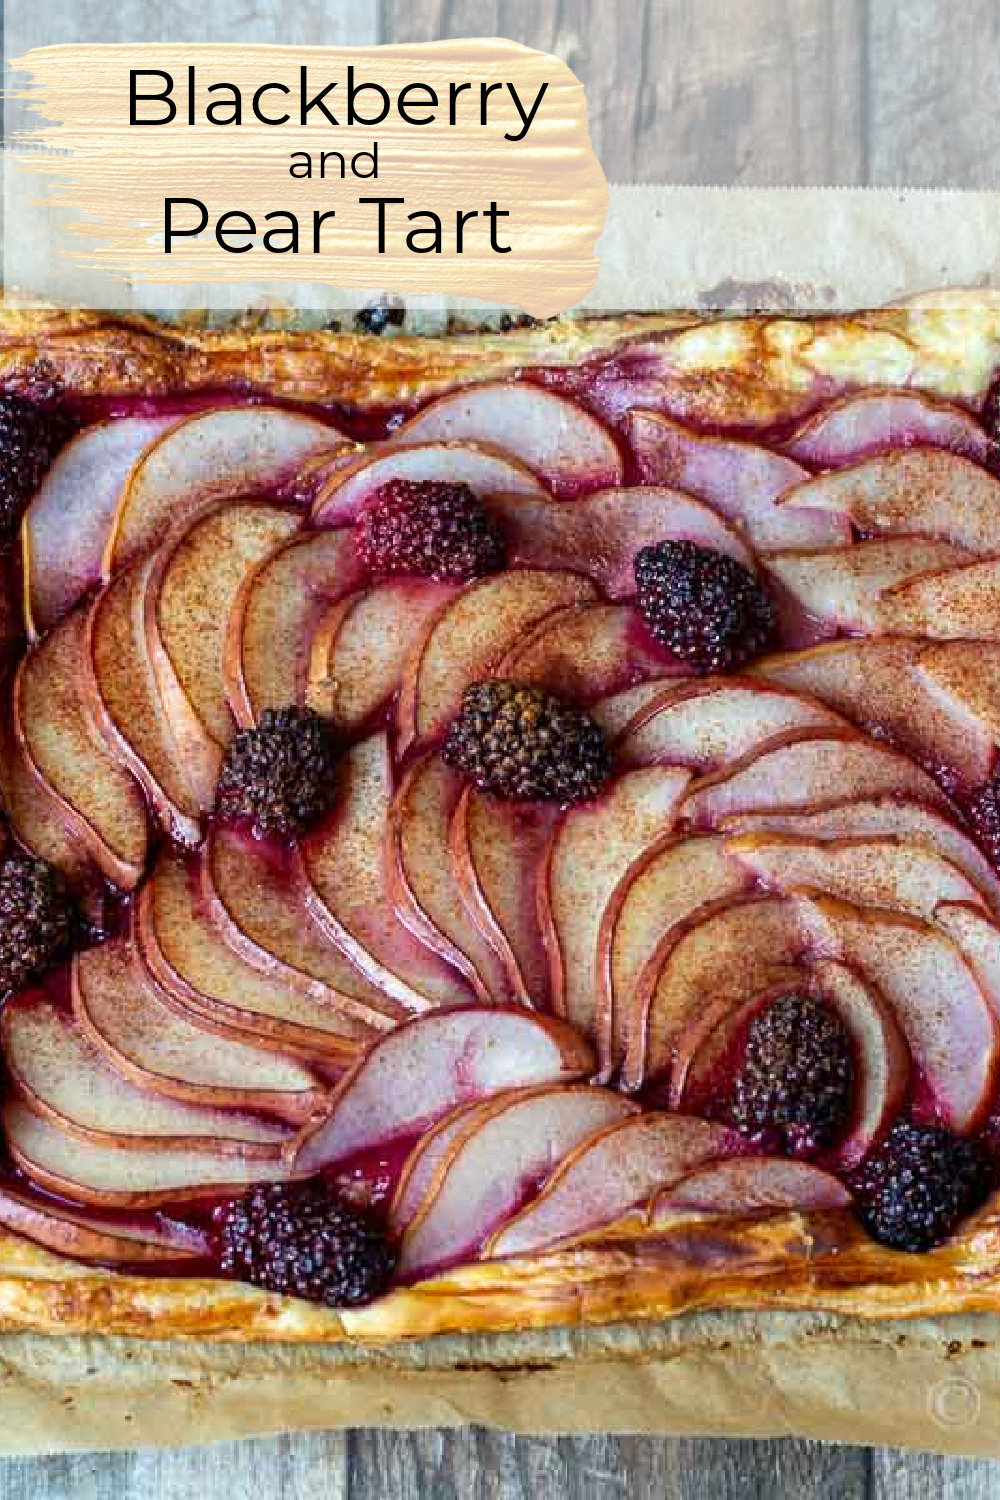 Pear tart with blackberries on puff pastry base.